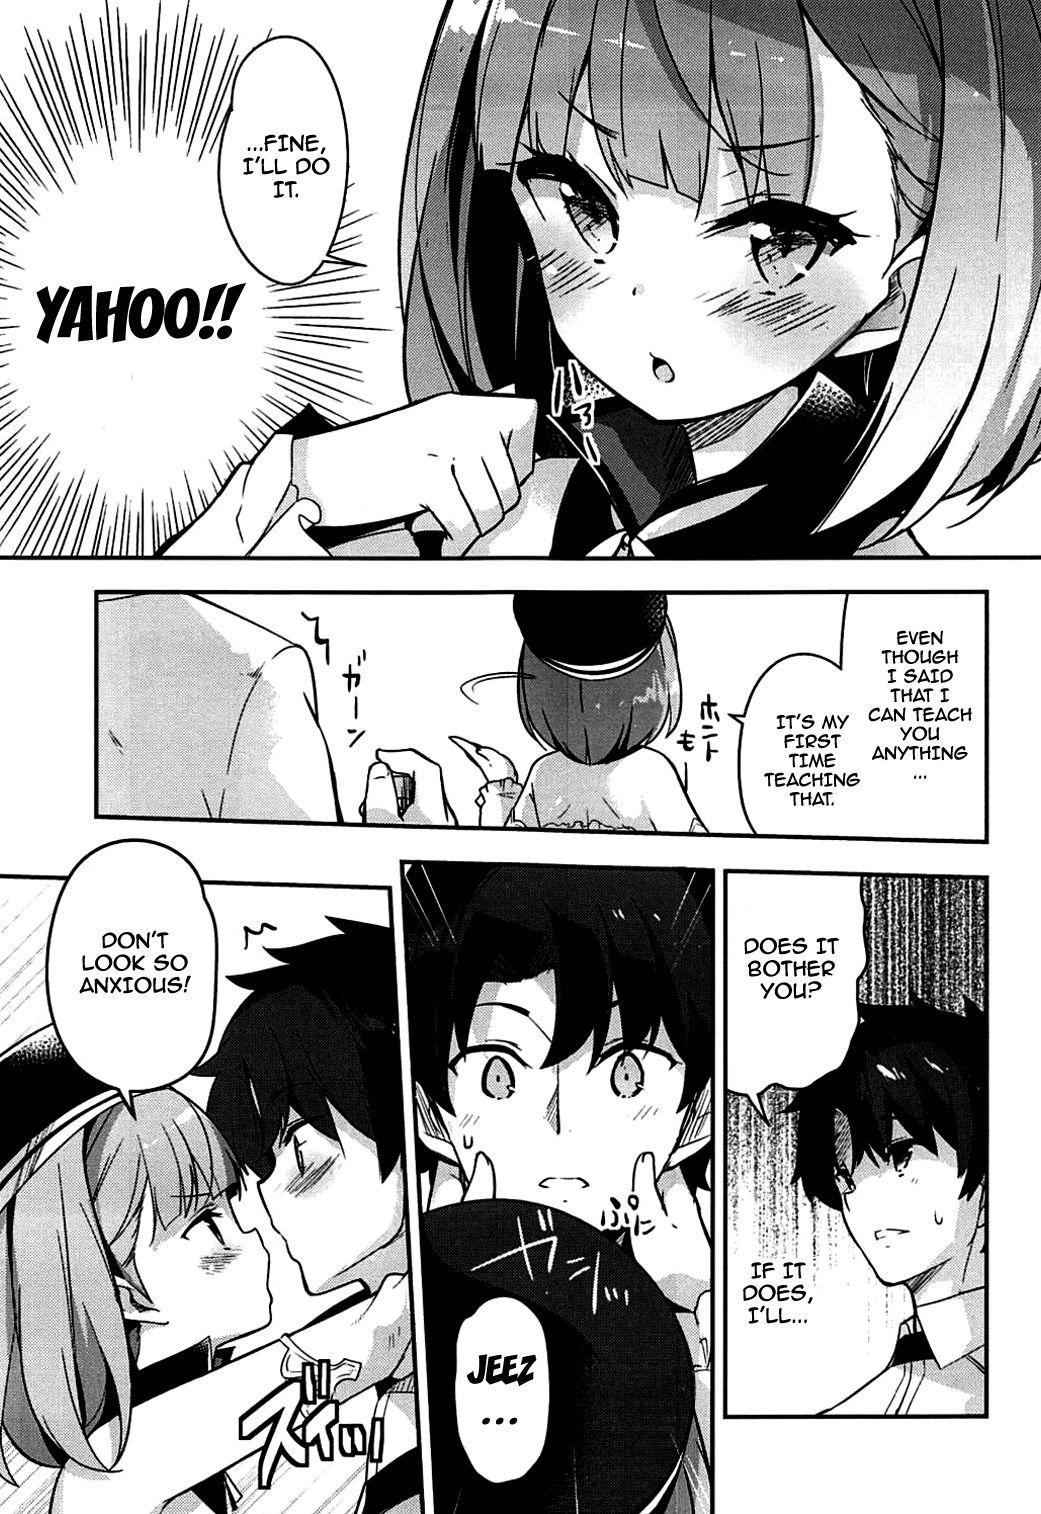 Moan Nandemo to wa Itta kedo... | I Said We Could Do Whatever But... - Fate grand order Peitos - Page 6